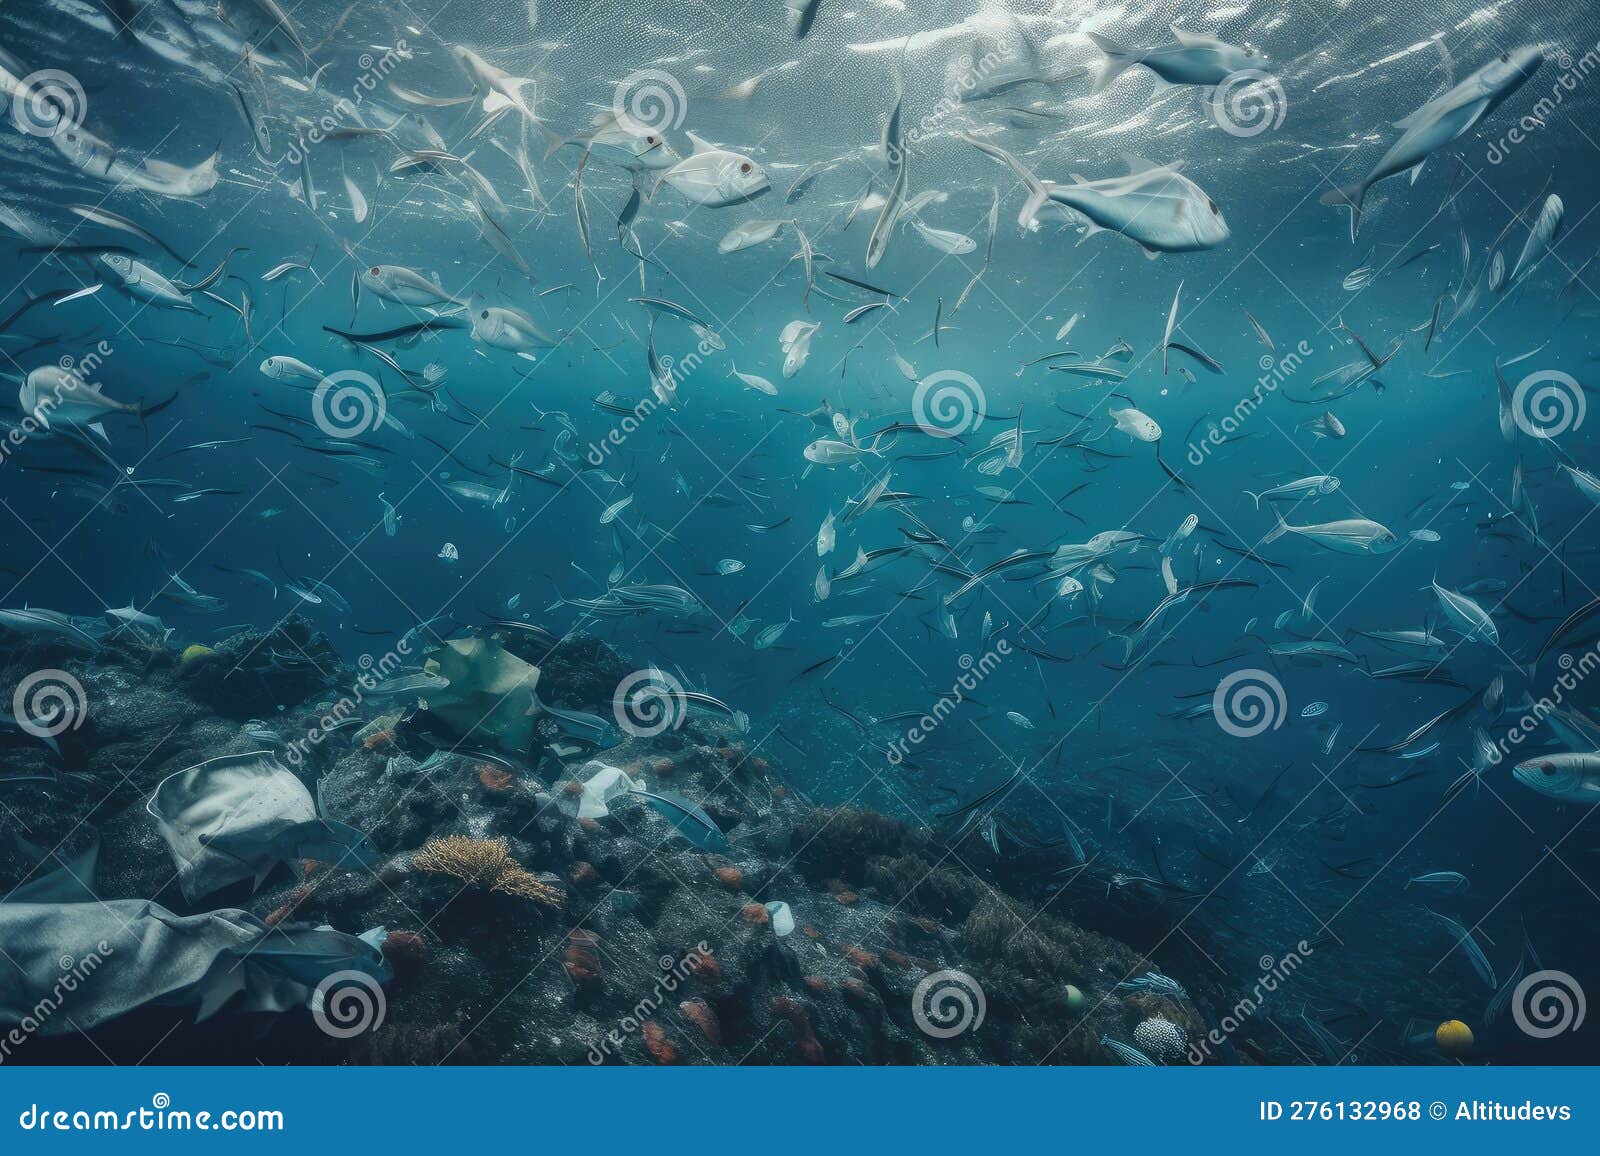 Microplastic Pollution in the Ocean, with Fish Swimming Amongst Debris ...